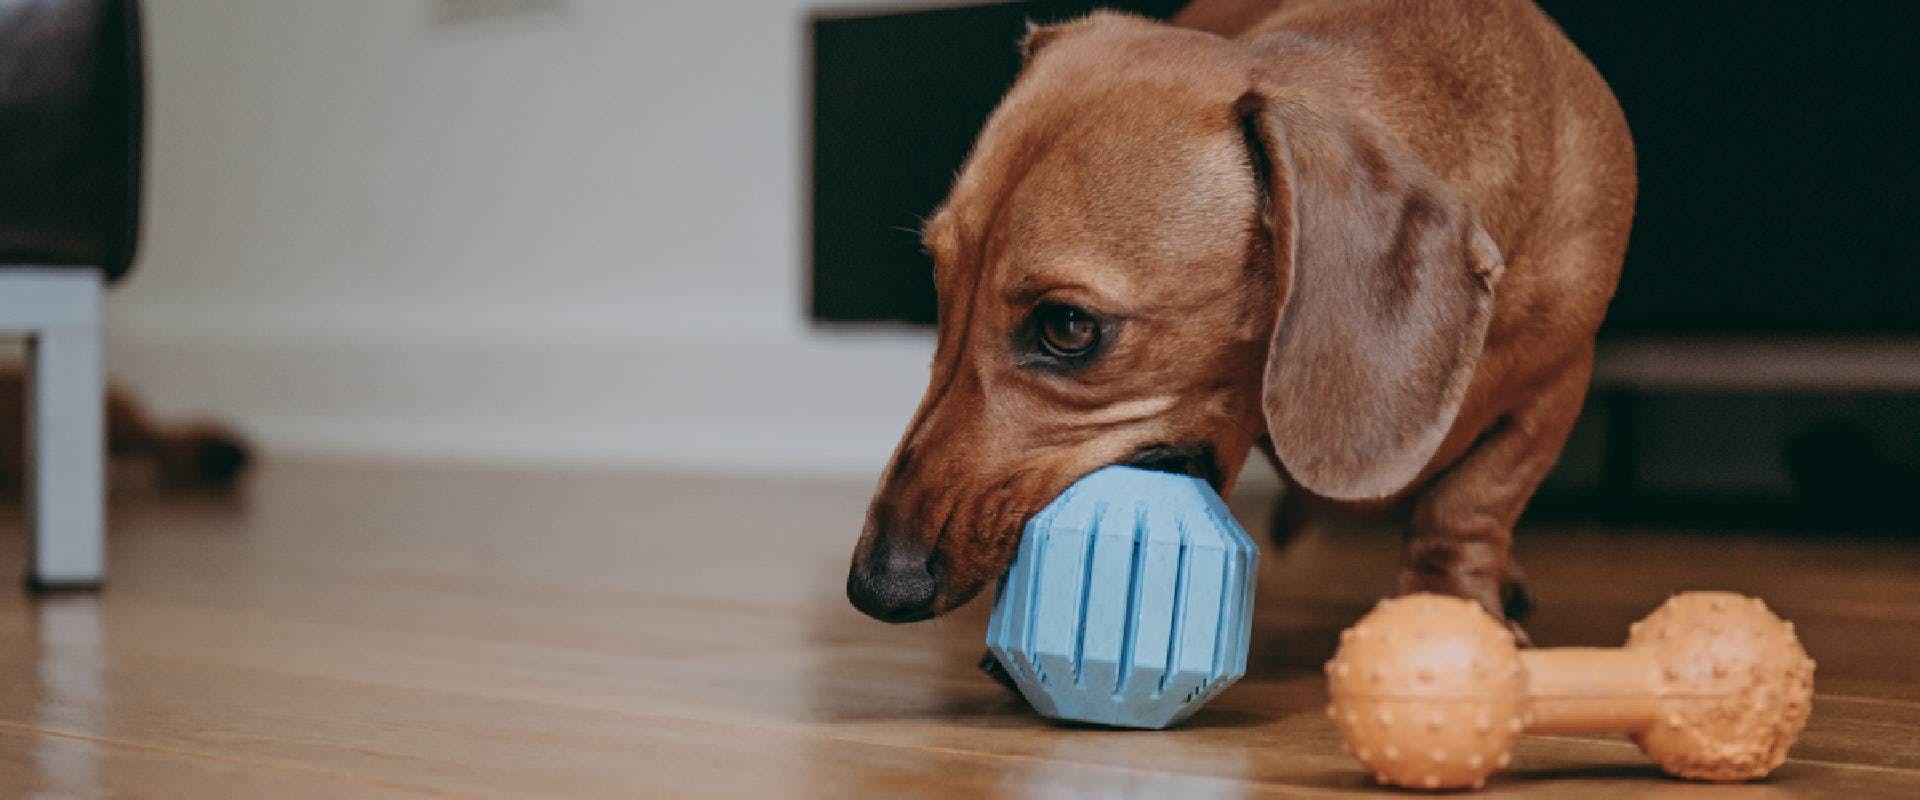 Best Toys to Keep Dog Busy While at Work - Zach's Pet Shop